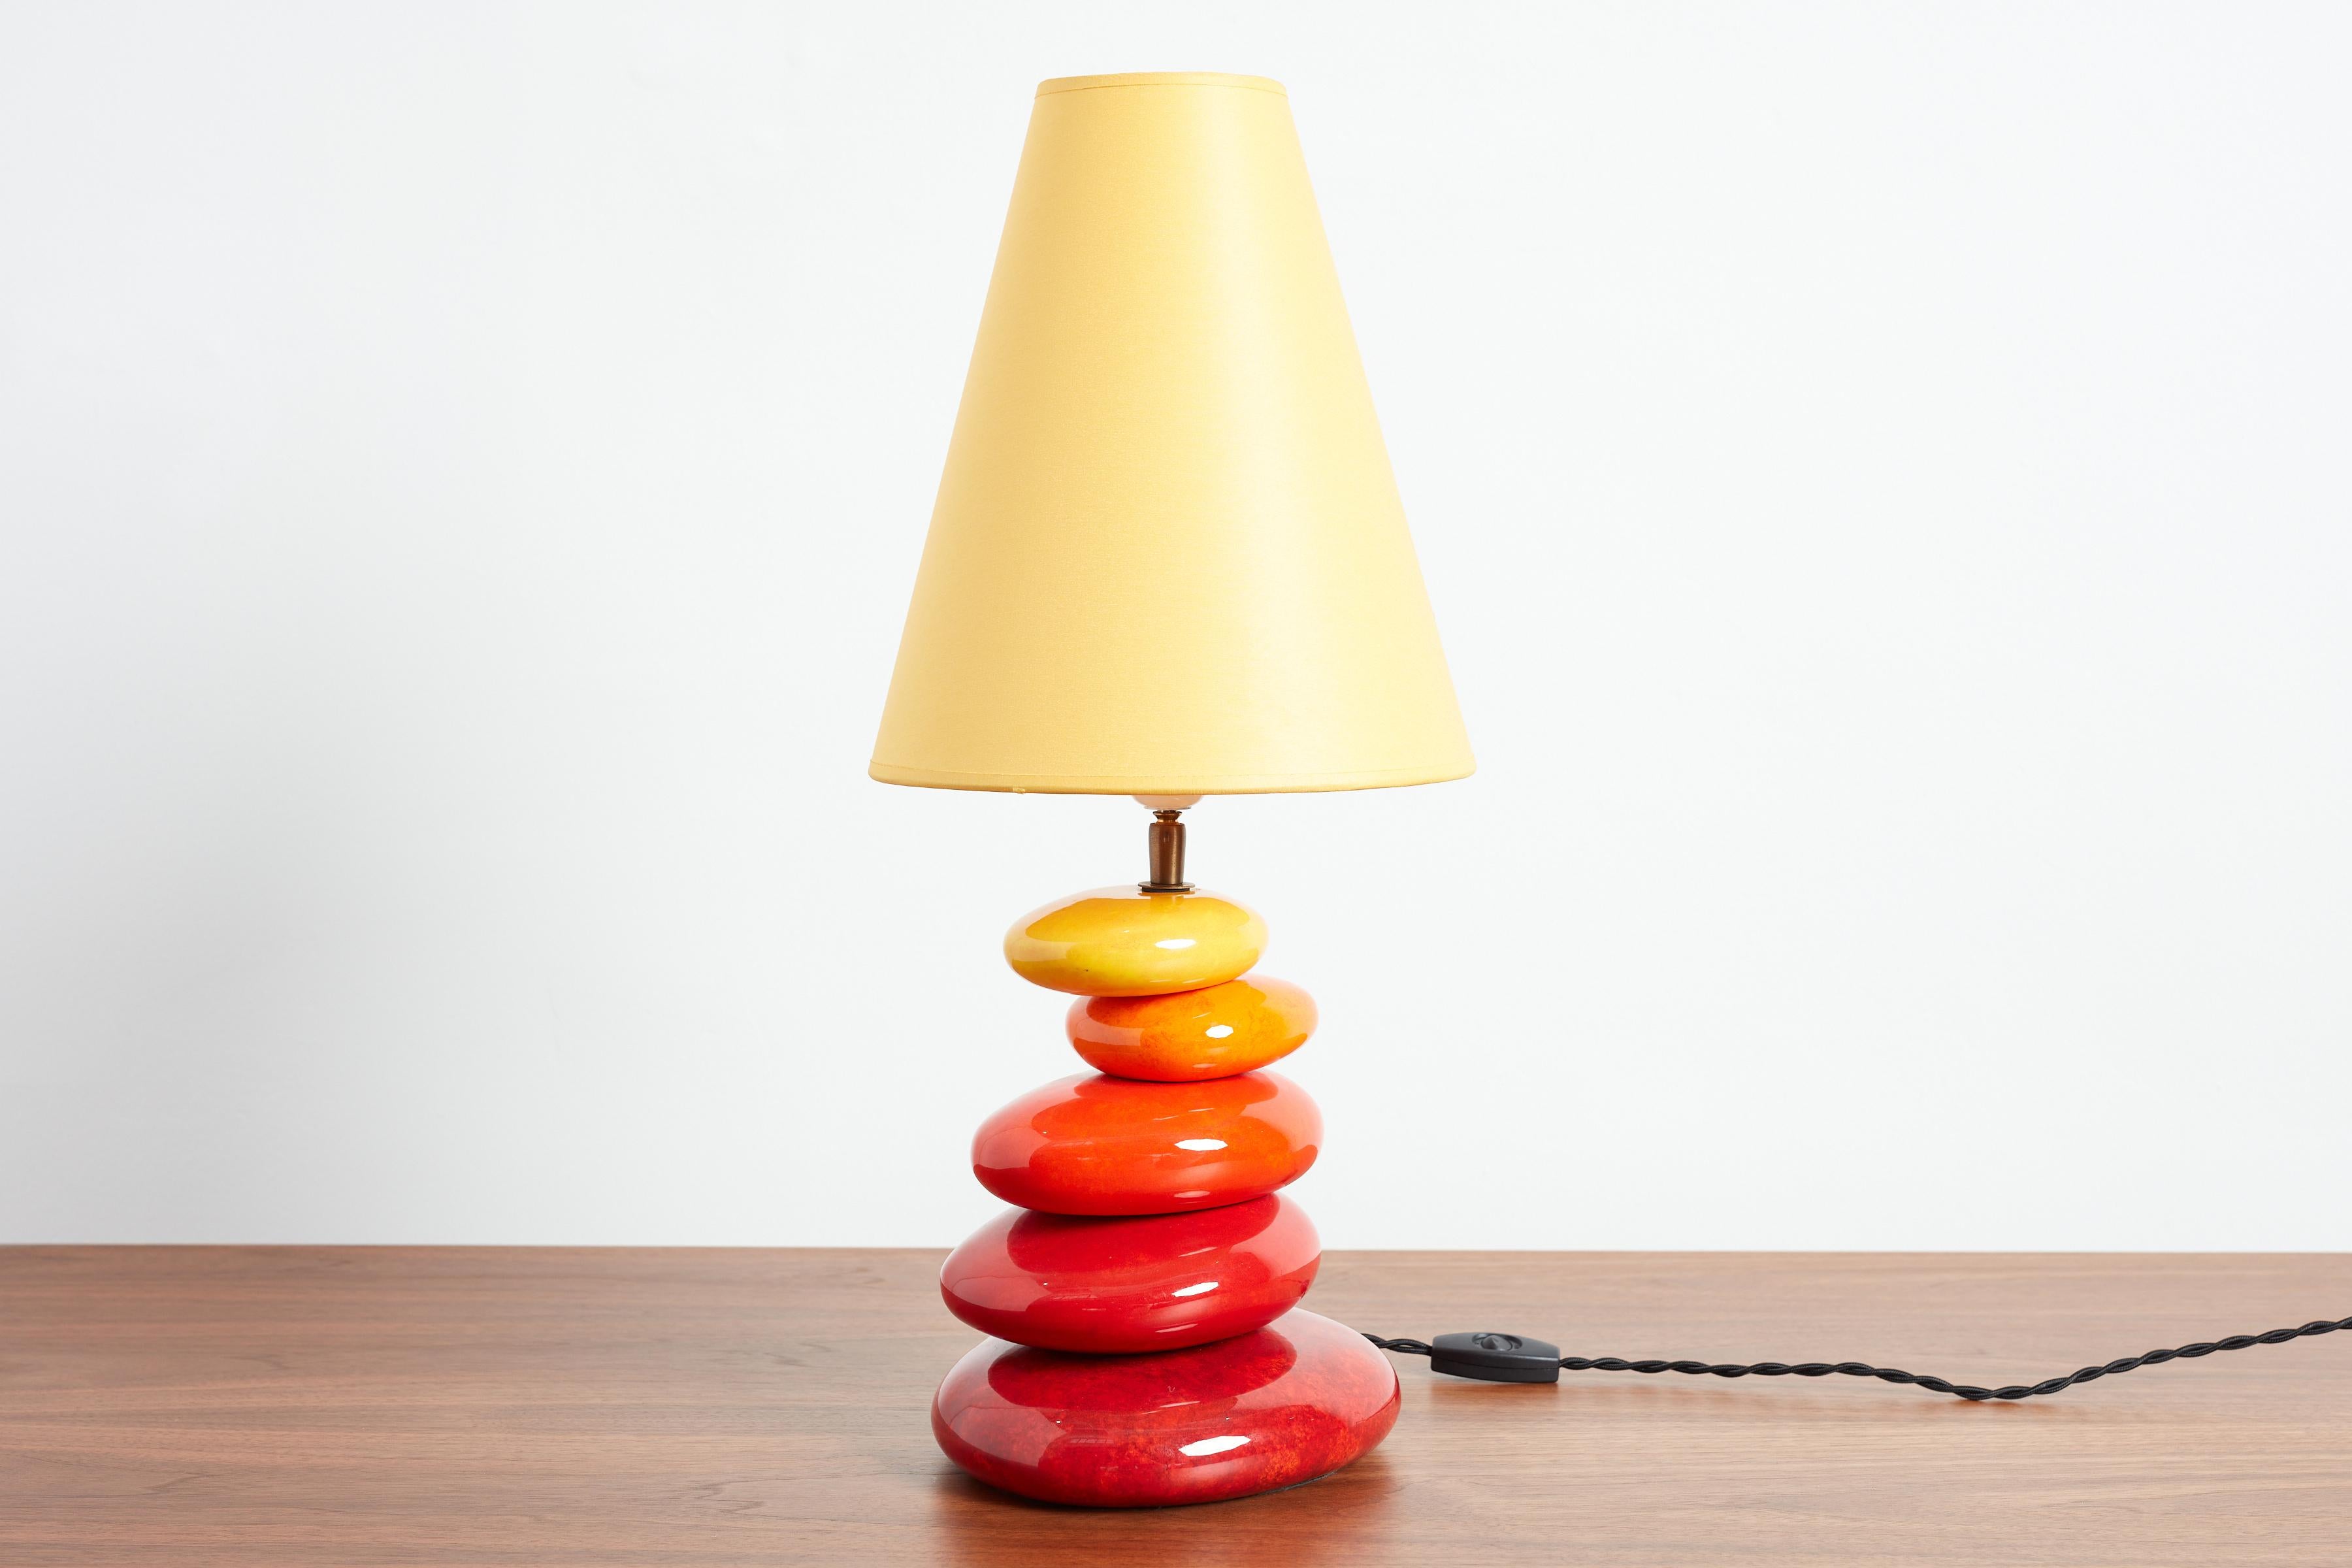 Colorful French ceramic table lamp with irregularly shaped stacked spheres.
France, circa 1970s
Original shade 
Newly rewired
